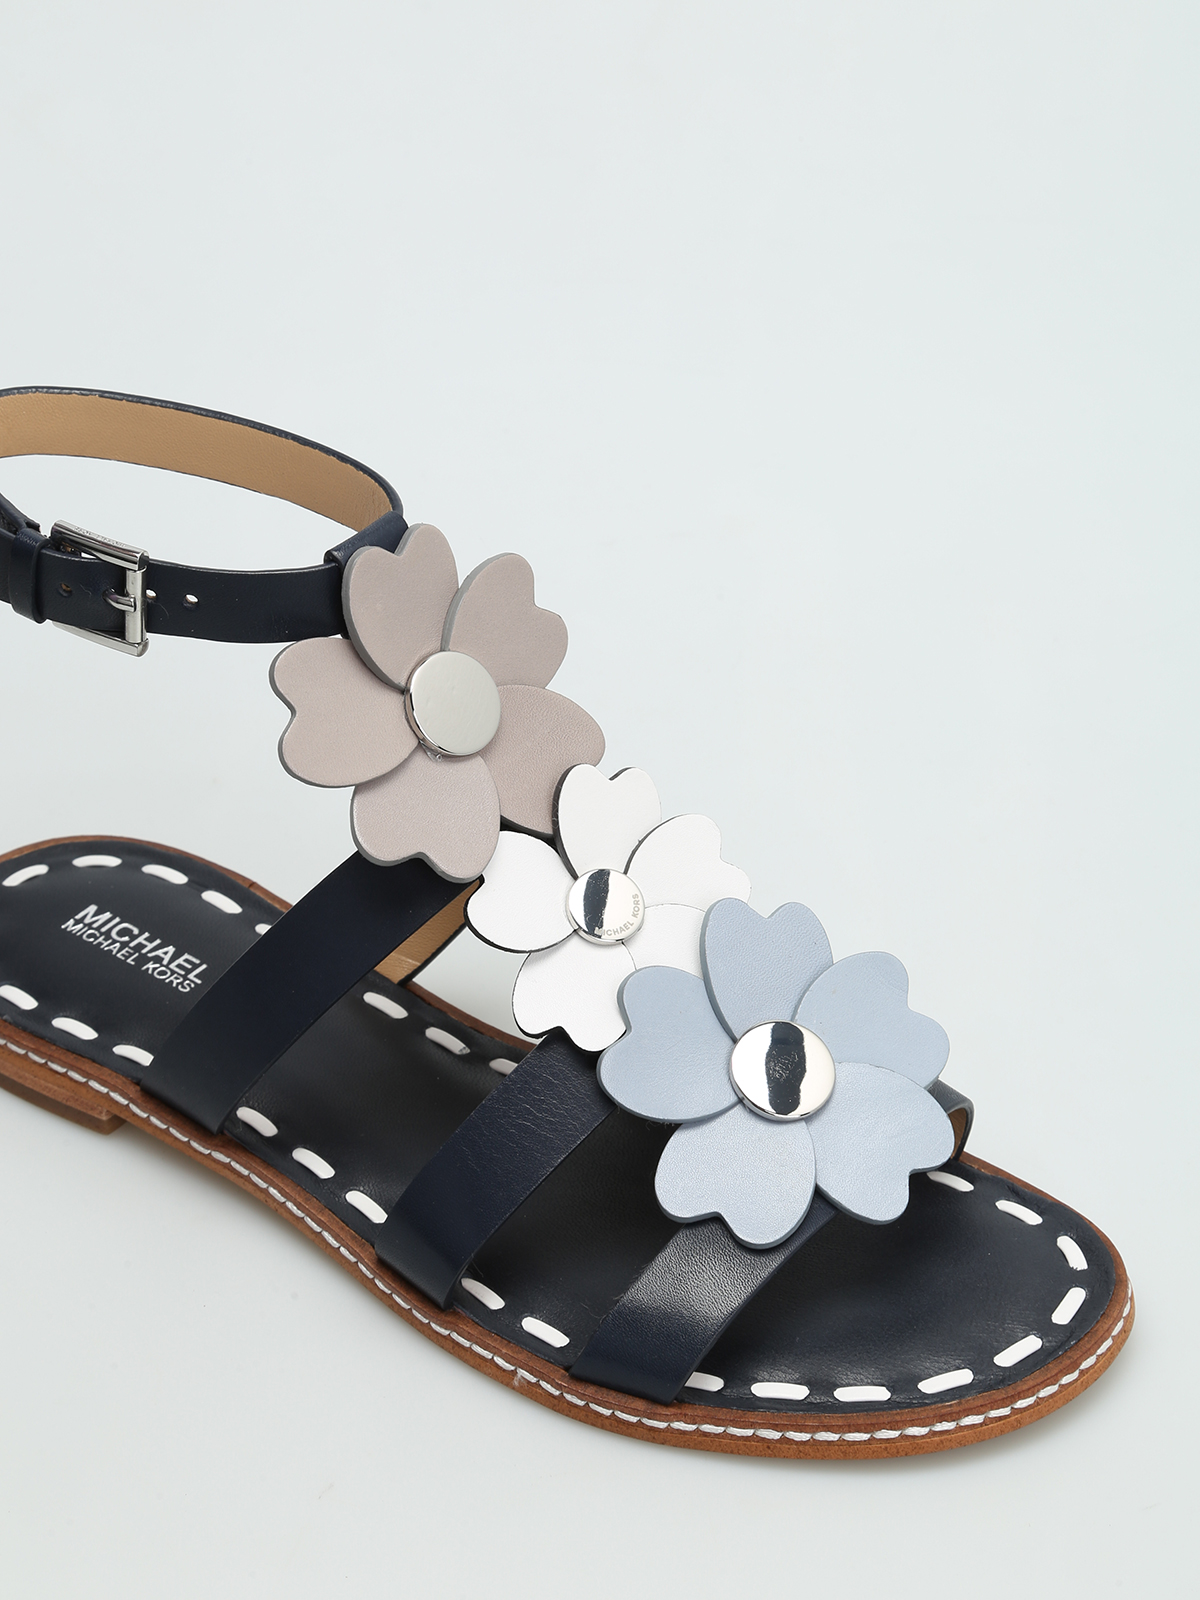 michael kors sandals with flowers